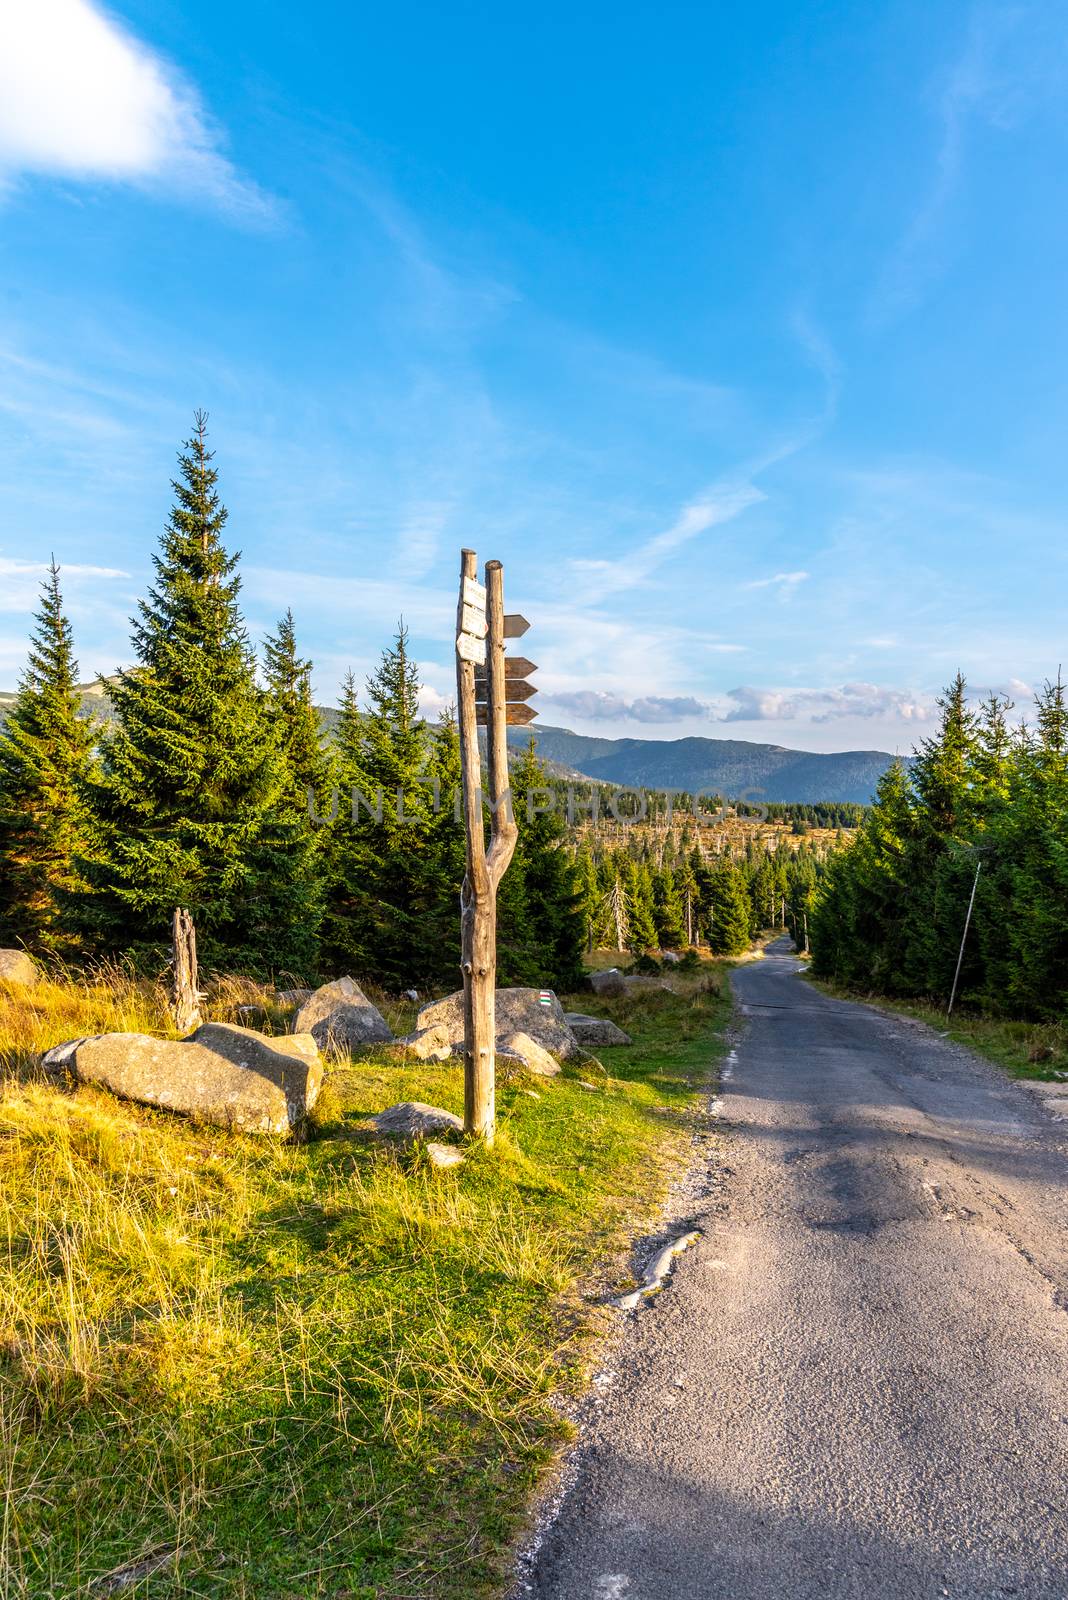 Tourist signpost in the middle of mountain landscape, Giant Mountains, Krkonose, Czech Republic by pyty